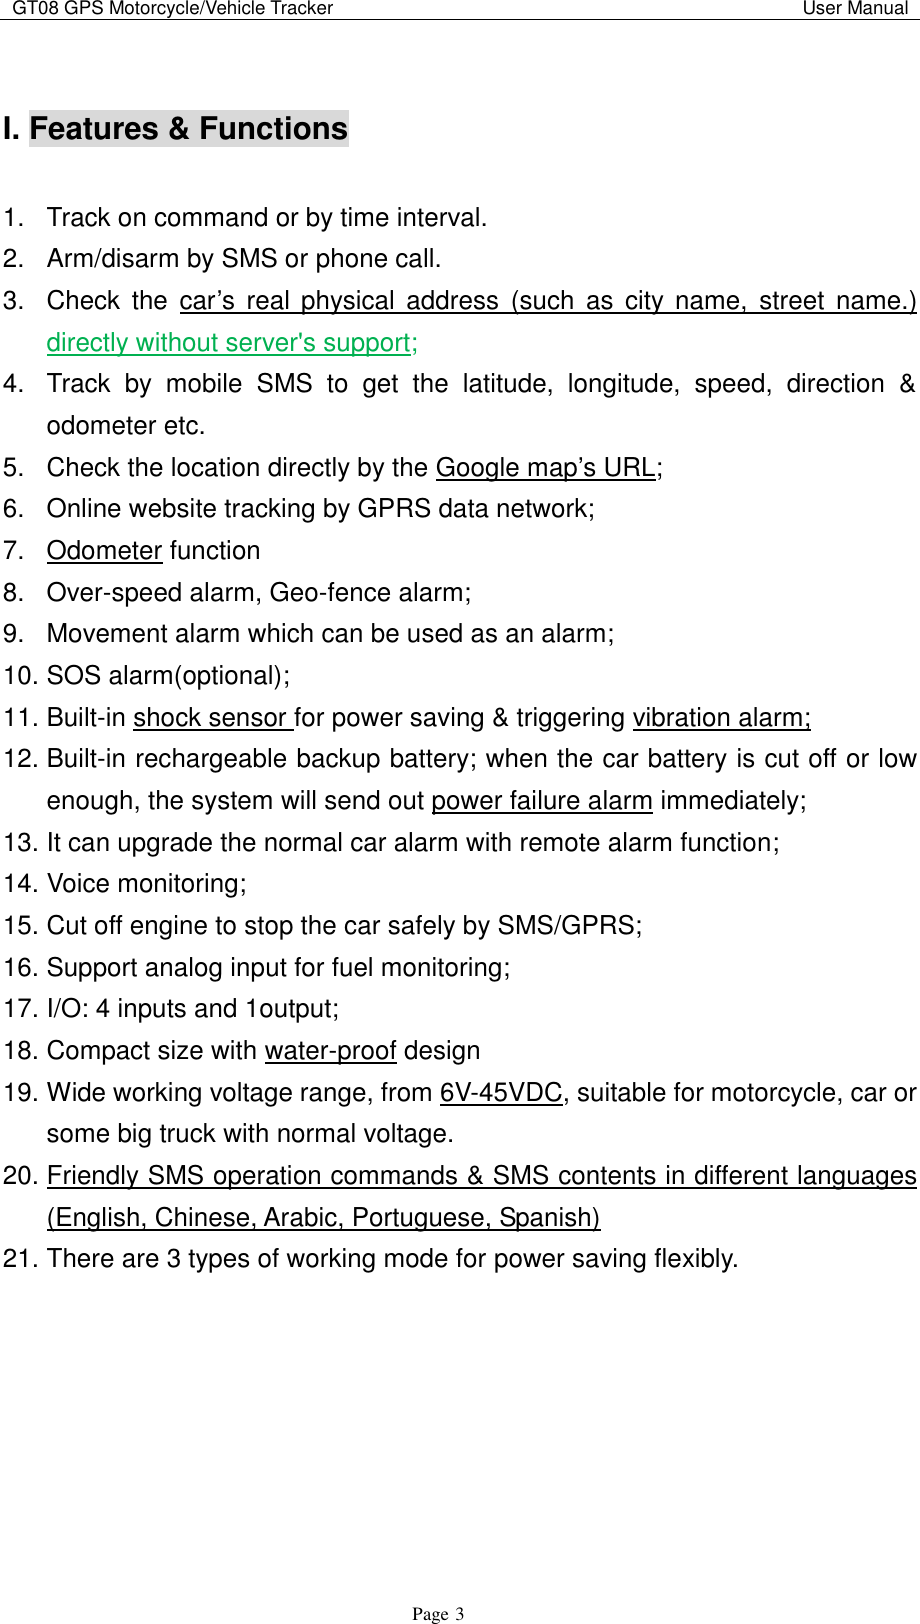 GT08 GPS Motorcycle/Vehicle Tracker                                                                                           User Manual                                     Page   3  I. Features &amp; Functions    1.  Track on command or by time interval. 2.  Arm/disarm by SMS or phone call. 3.  Check  the  car‟s real  physical  address  (such  as  city  name,  street name.) directly without server&apos;s support; 4.  Track  by  mobile  SMS  to  get  the  latitude,  longitude,  speed,  direction  &amp; odometer etc. 5.  Check the location directly by the Google map‟s URL; 6.  Online website tracking by GPRS data network; 7.  Odometer function 8.  Over-speed alarm, Geo-fence alarm; 9.  Movement alarm which can be used as an alarm; 10. SOS alarm(optional); 11. Built-in shock sensor for power saving &amp; triggering vibration alarm; 12. Built-in rechargeable backup battery; when the car battery is cut off or low enough, the system will send out power failure alarm immediately; 13. It can upgrade the normal car alarm with remote alarm function; 14. Voice monitoring; 15. Cut off engine to stop the car safely by SMS/GPRS; 16. Support analog input for fuel monitoring; 17. I/O: 4 inputs and 1output; 18. Compact size with water-proof design 19. Wide working voltage range, from 6V-45VDC, suitable for motorcycle, car or some big truck with normal voltage. 20. Friendly SMS operation commands &amp; SMS contents in different languages (English, Chinese, Arabic, Portuguese, Spanish) 21. There are 3 types of working mode for power saving flexibly.        